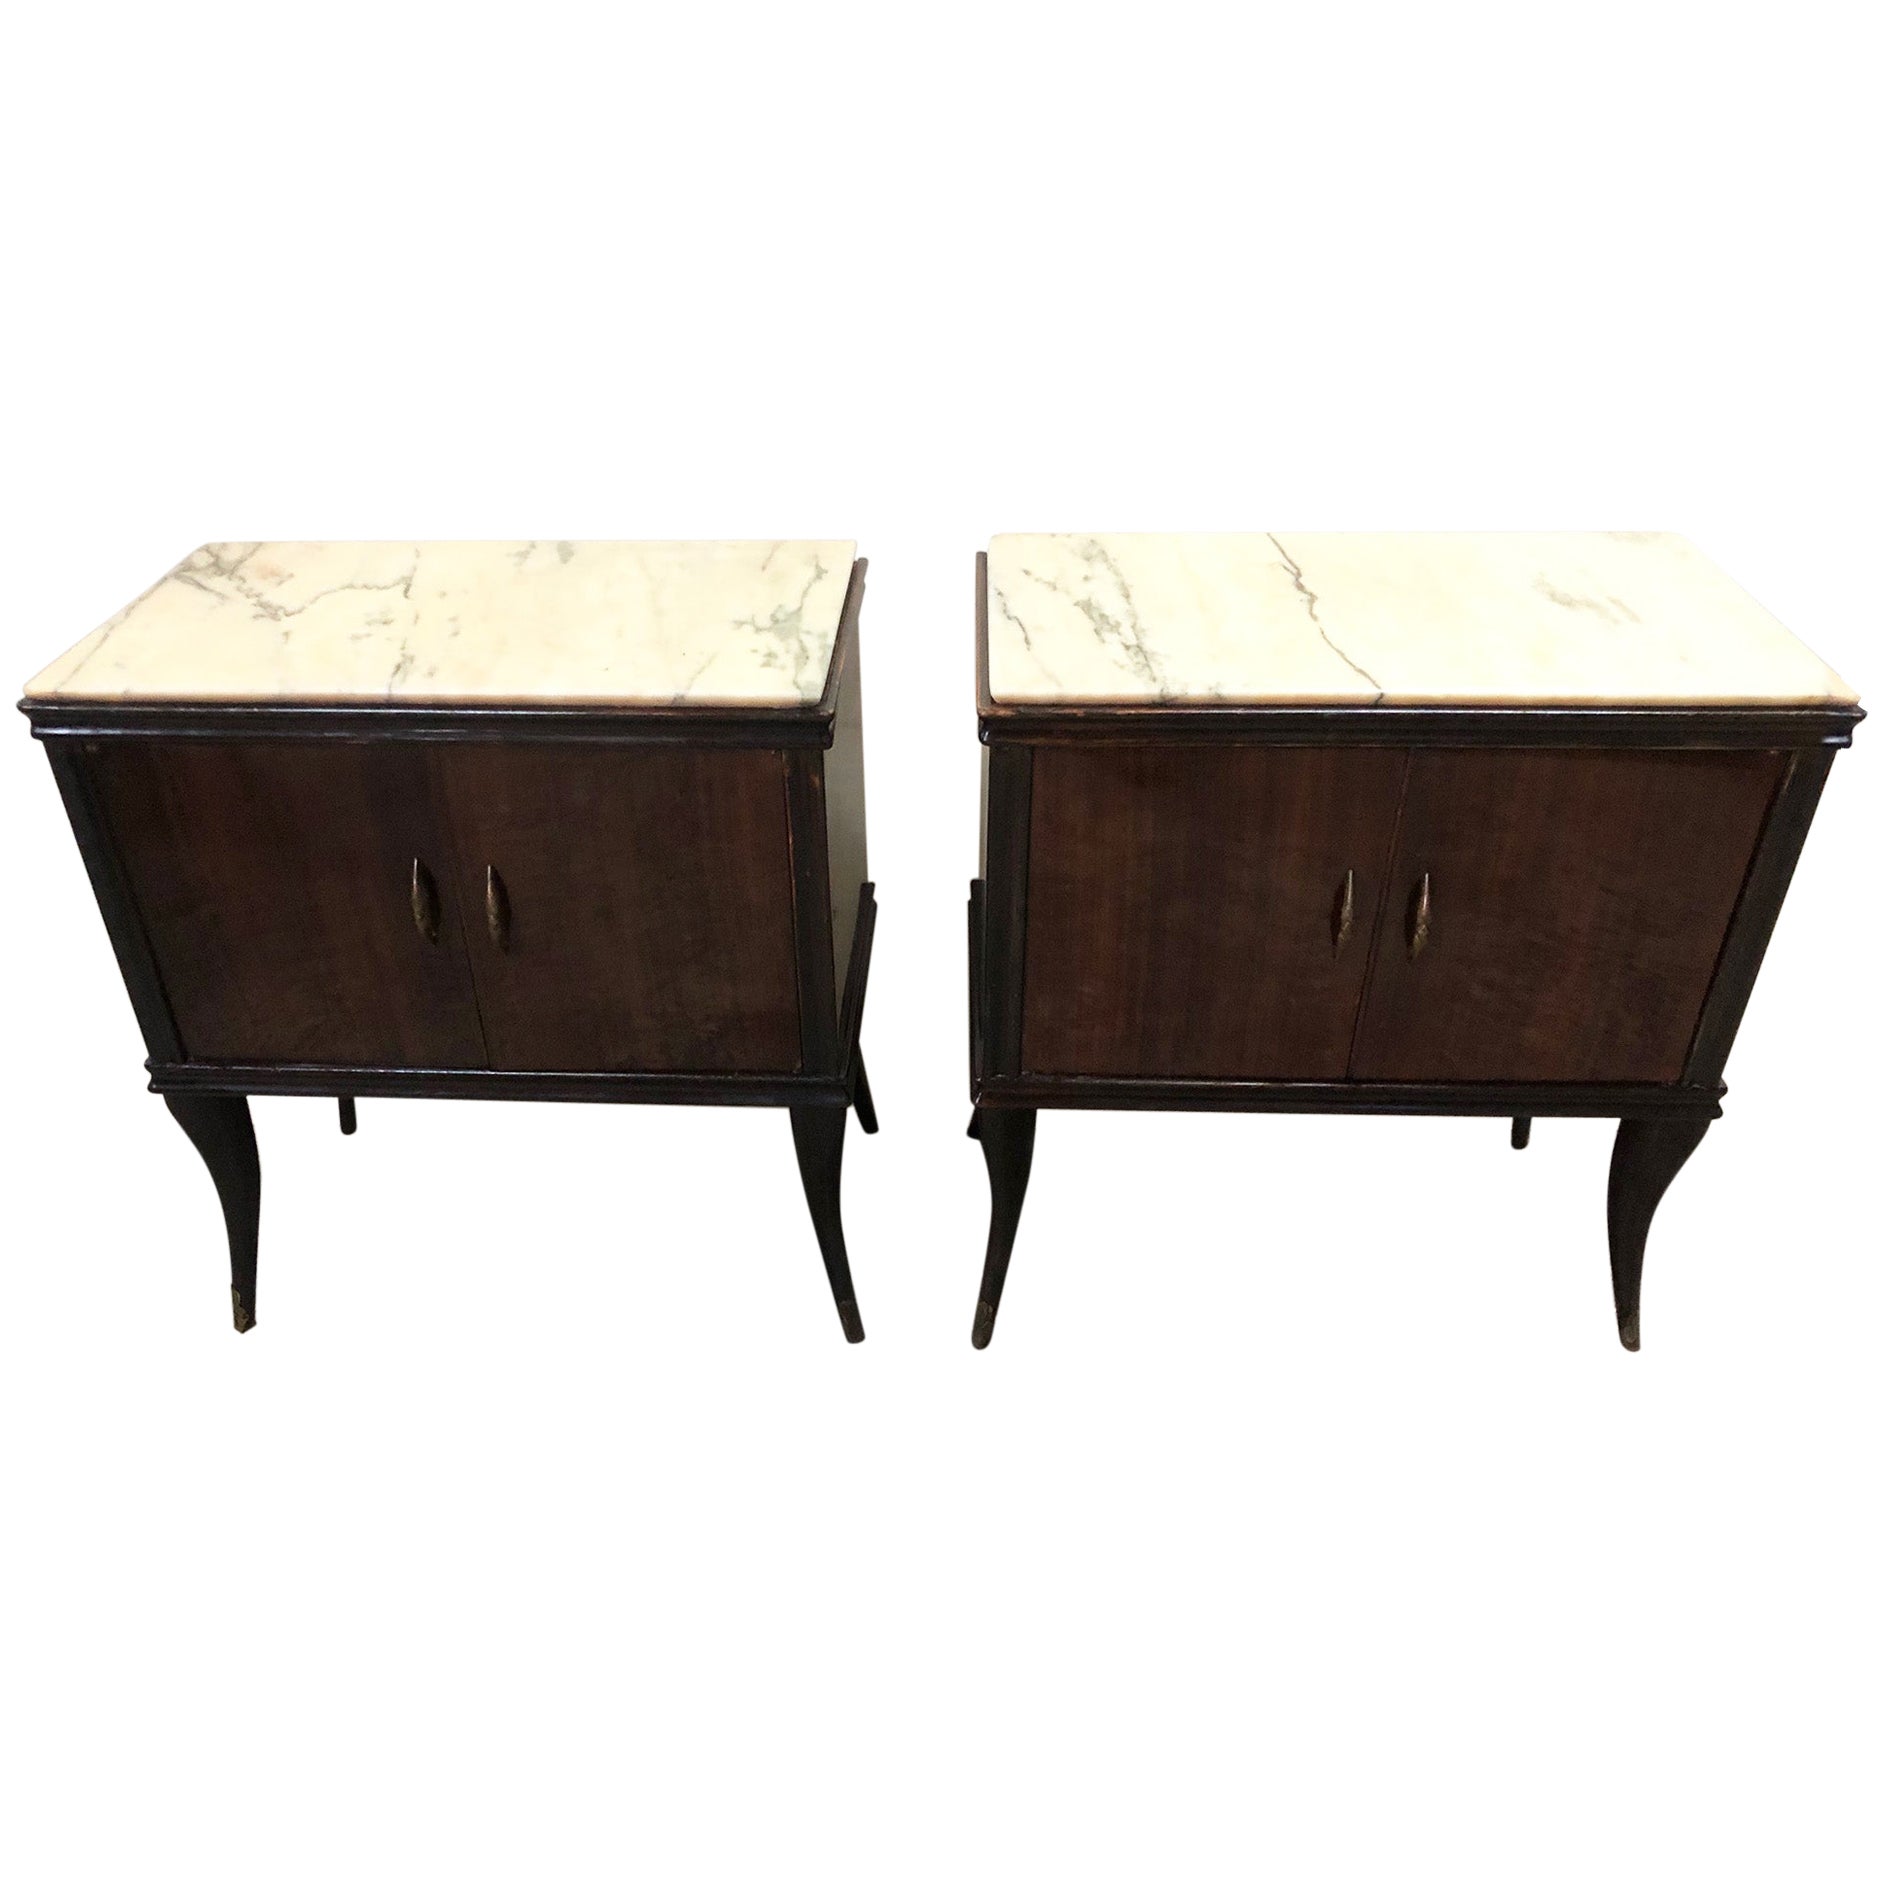 Pair of Italian Night Stands in Walnut with Cream Marble